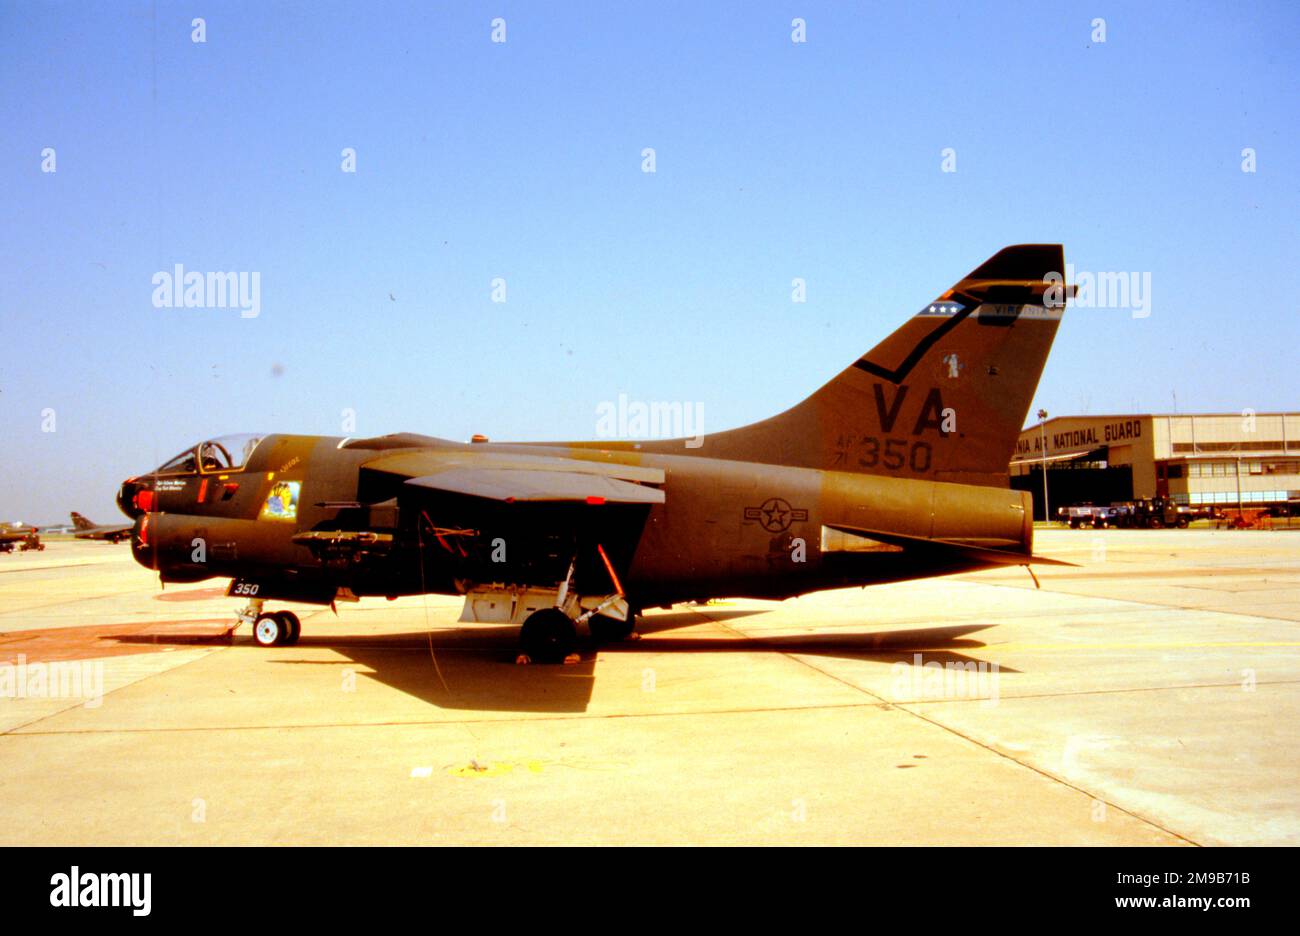 United States Air Force (USAF) - Ling-Temco-Vought A-7D-11-CV Corsair II 71-0350 (msn D-261), of the 149th Tactical Fighter Squadron, Virginia Air National Guard. Stock Photo